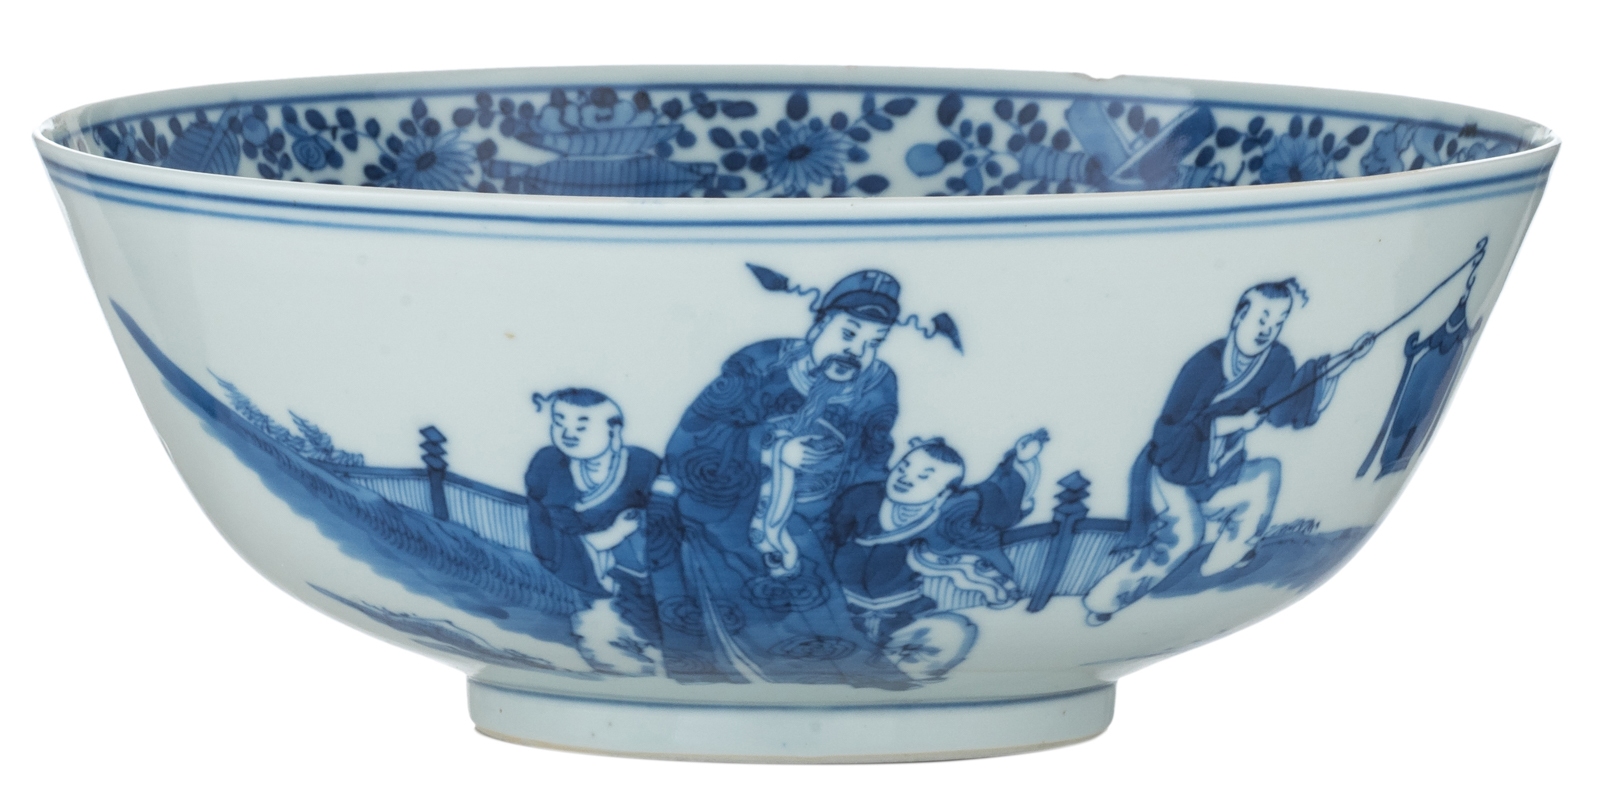 A Chinese blue and white bowl, inside and outside decorated with figures and auspicious symbols, mar